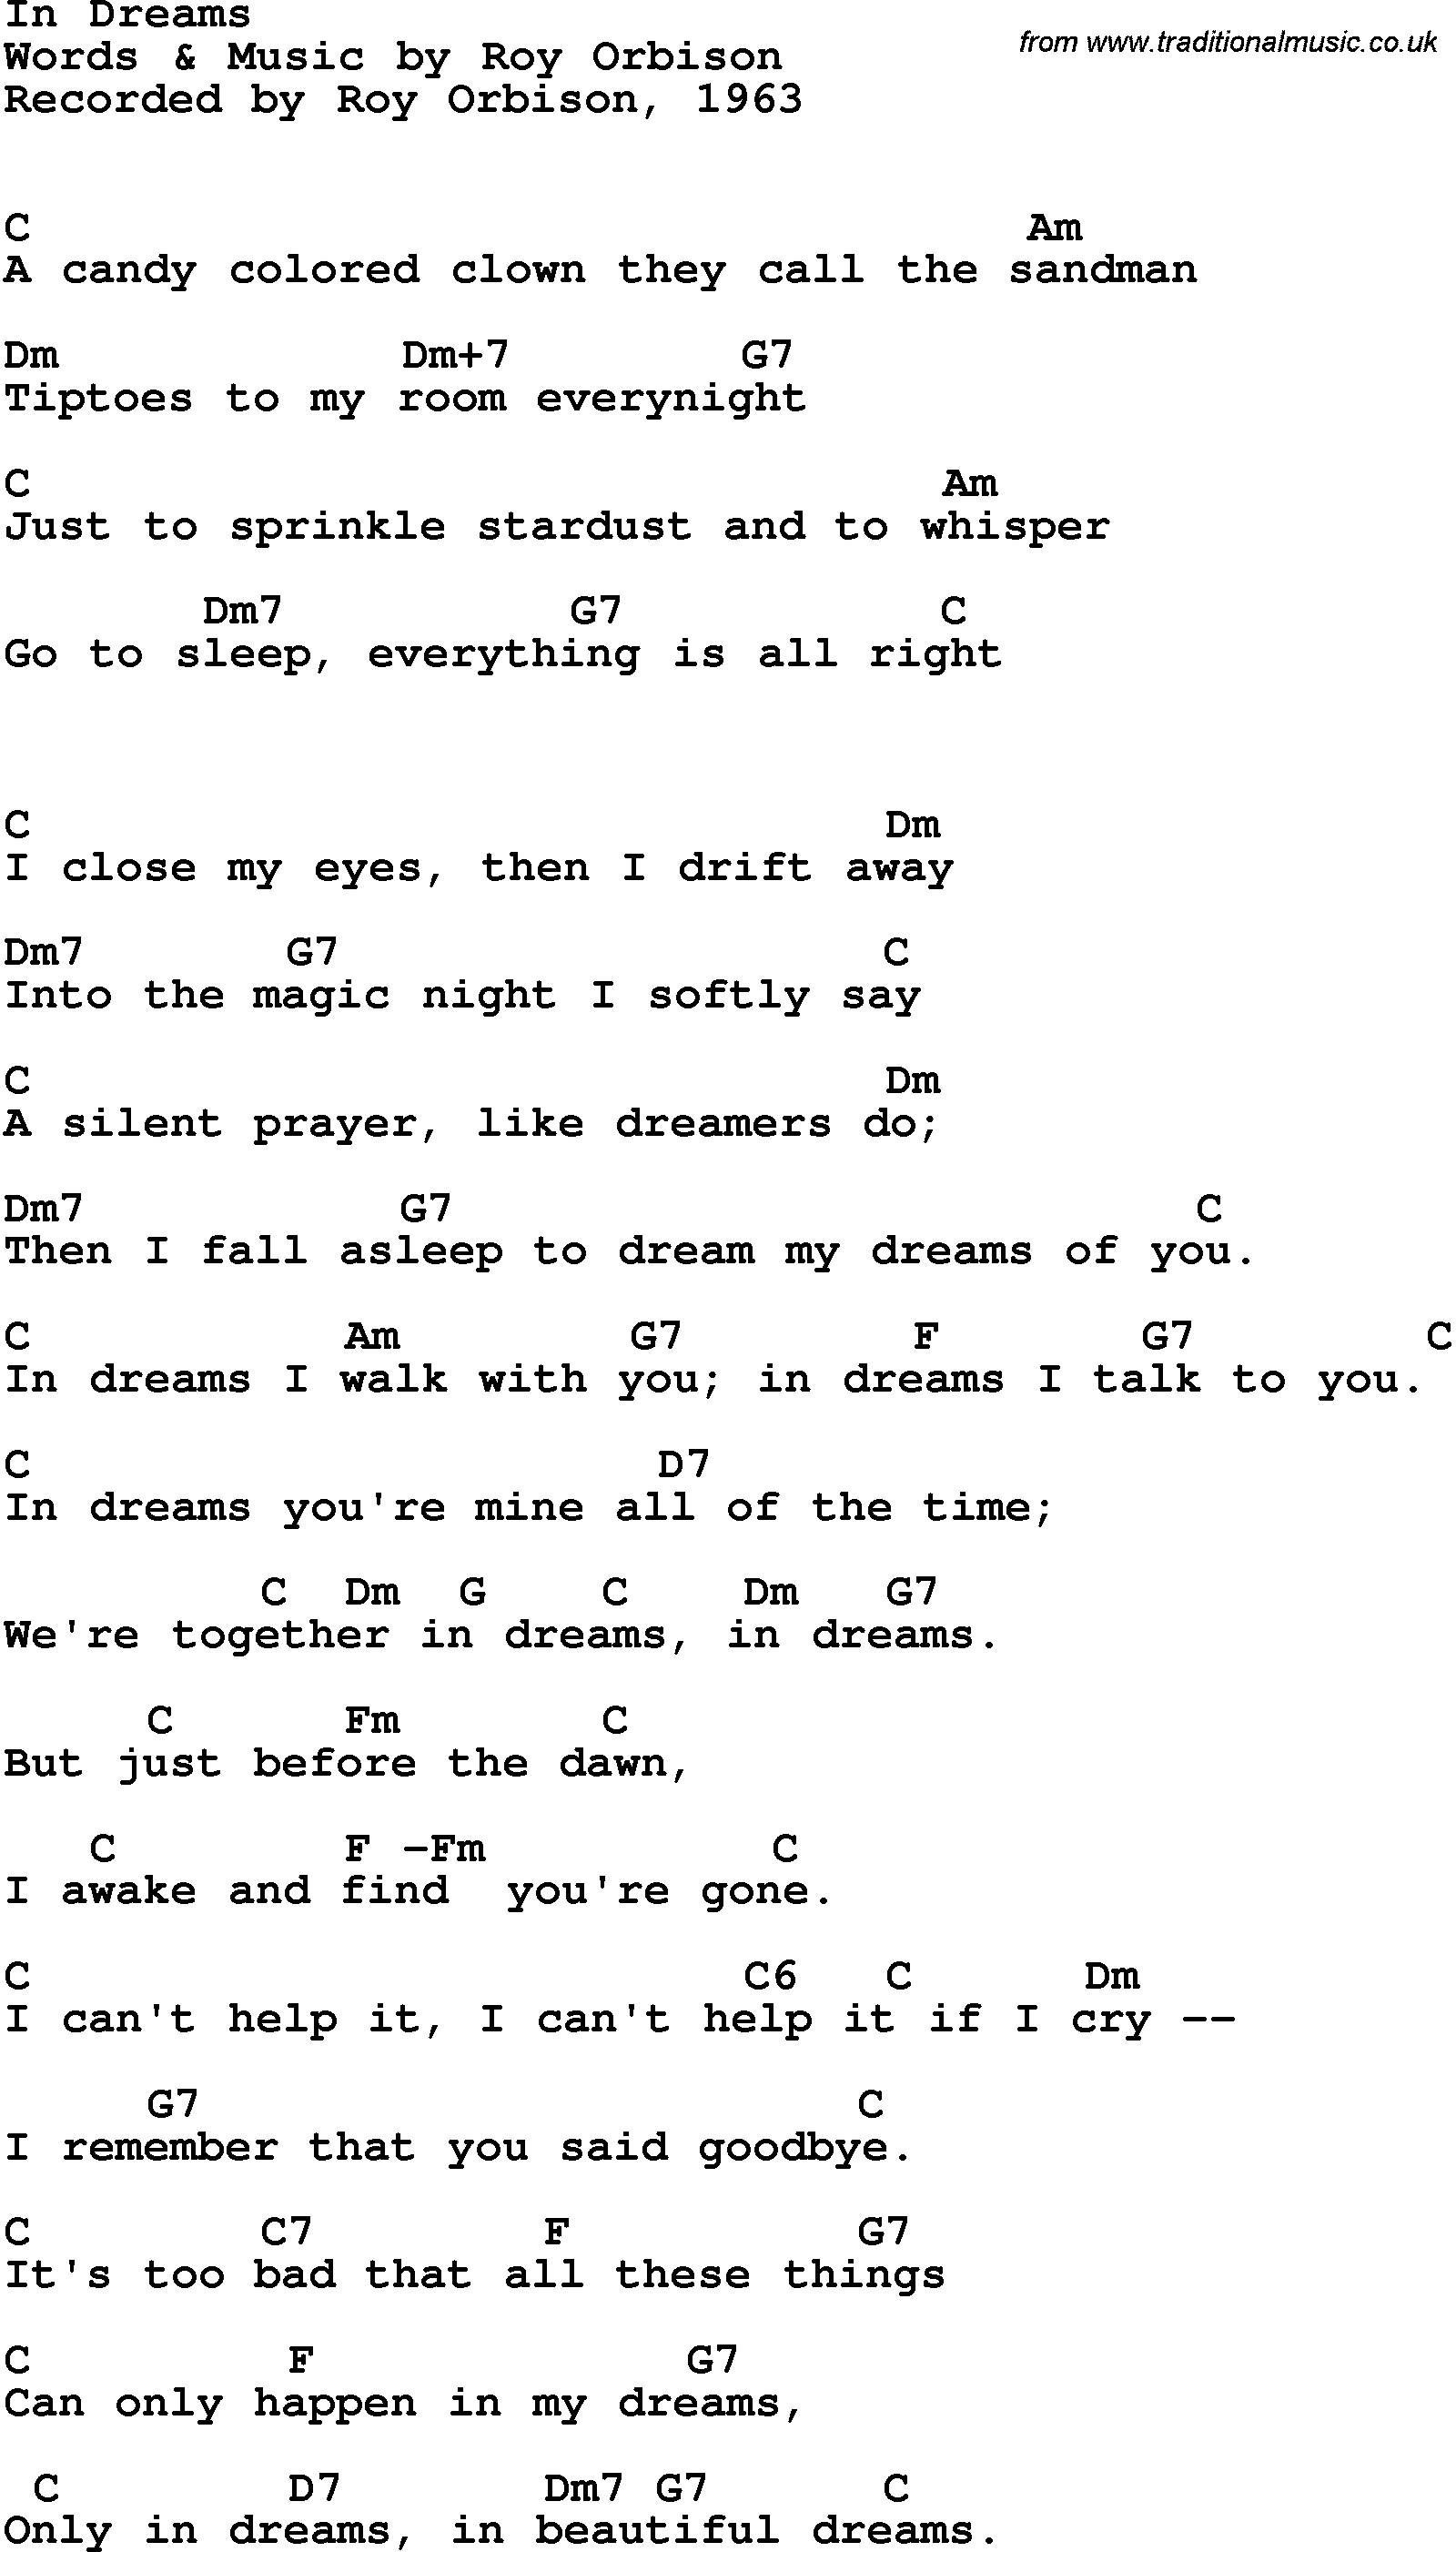 Song Lyrics with guitar chords for In Dreams - Roy Orbison, 1963